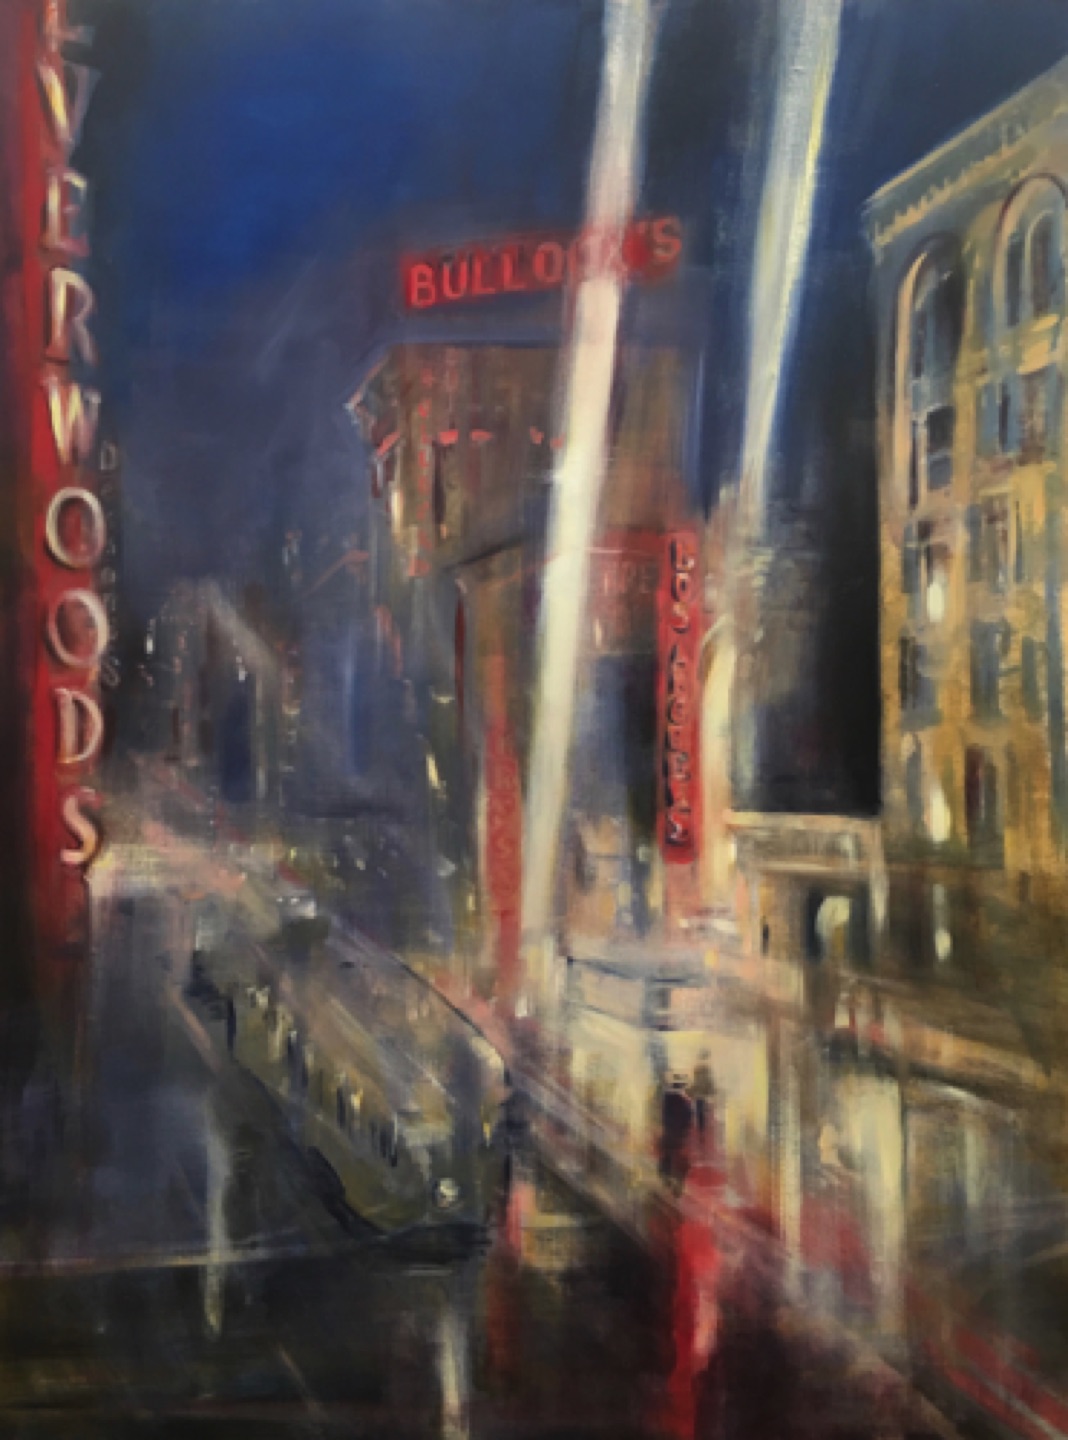 Gregg Chadwick
City Lights - Chaplin's Night
48"x36"oil on linen 2019
Spencer and Trine Churchill Collection, Hollywood, California